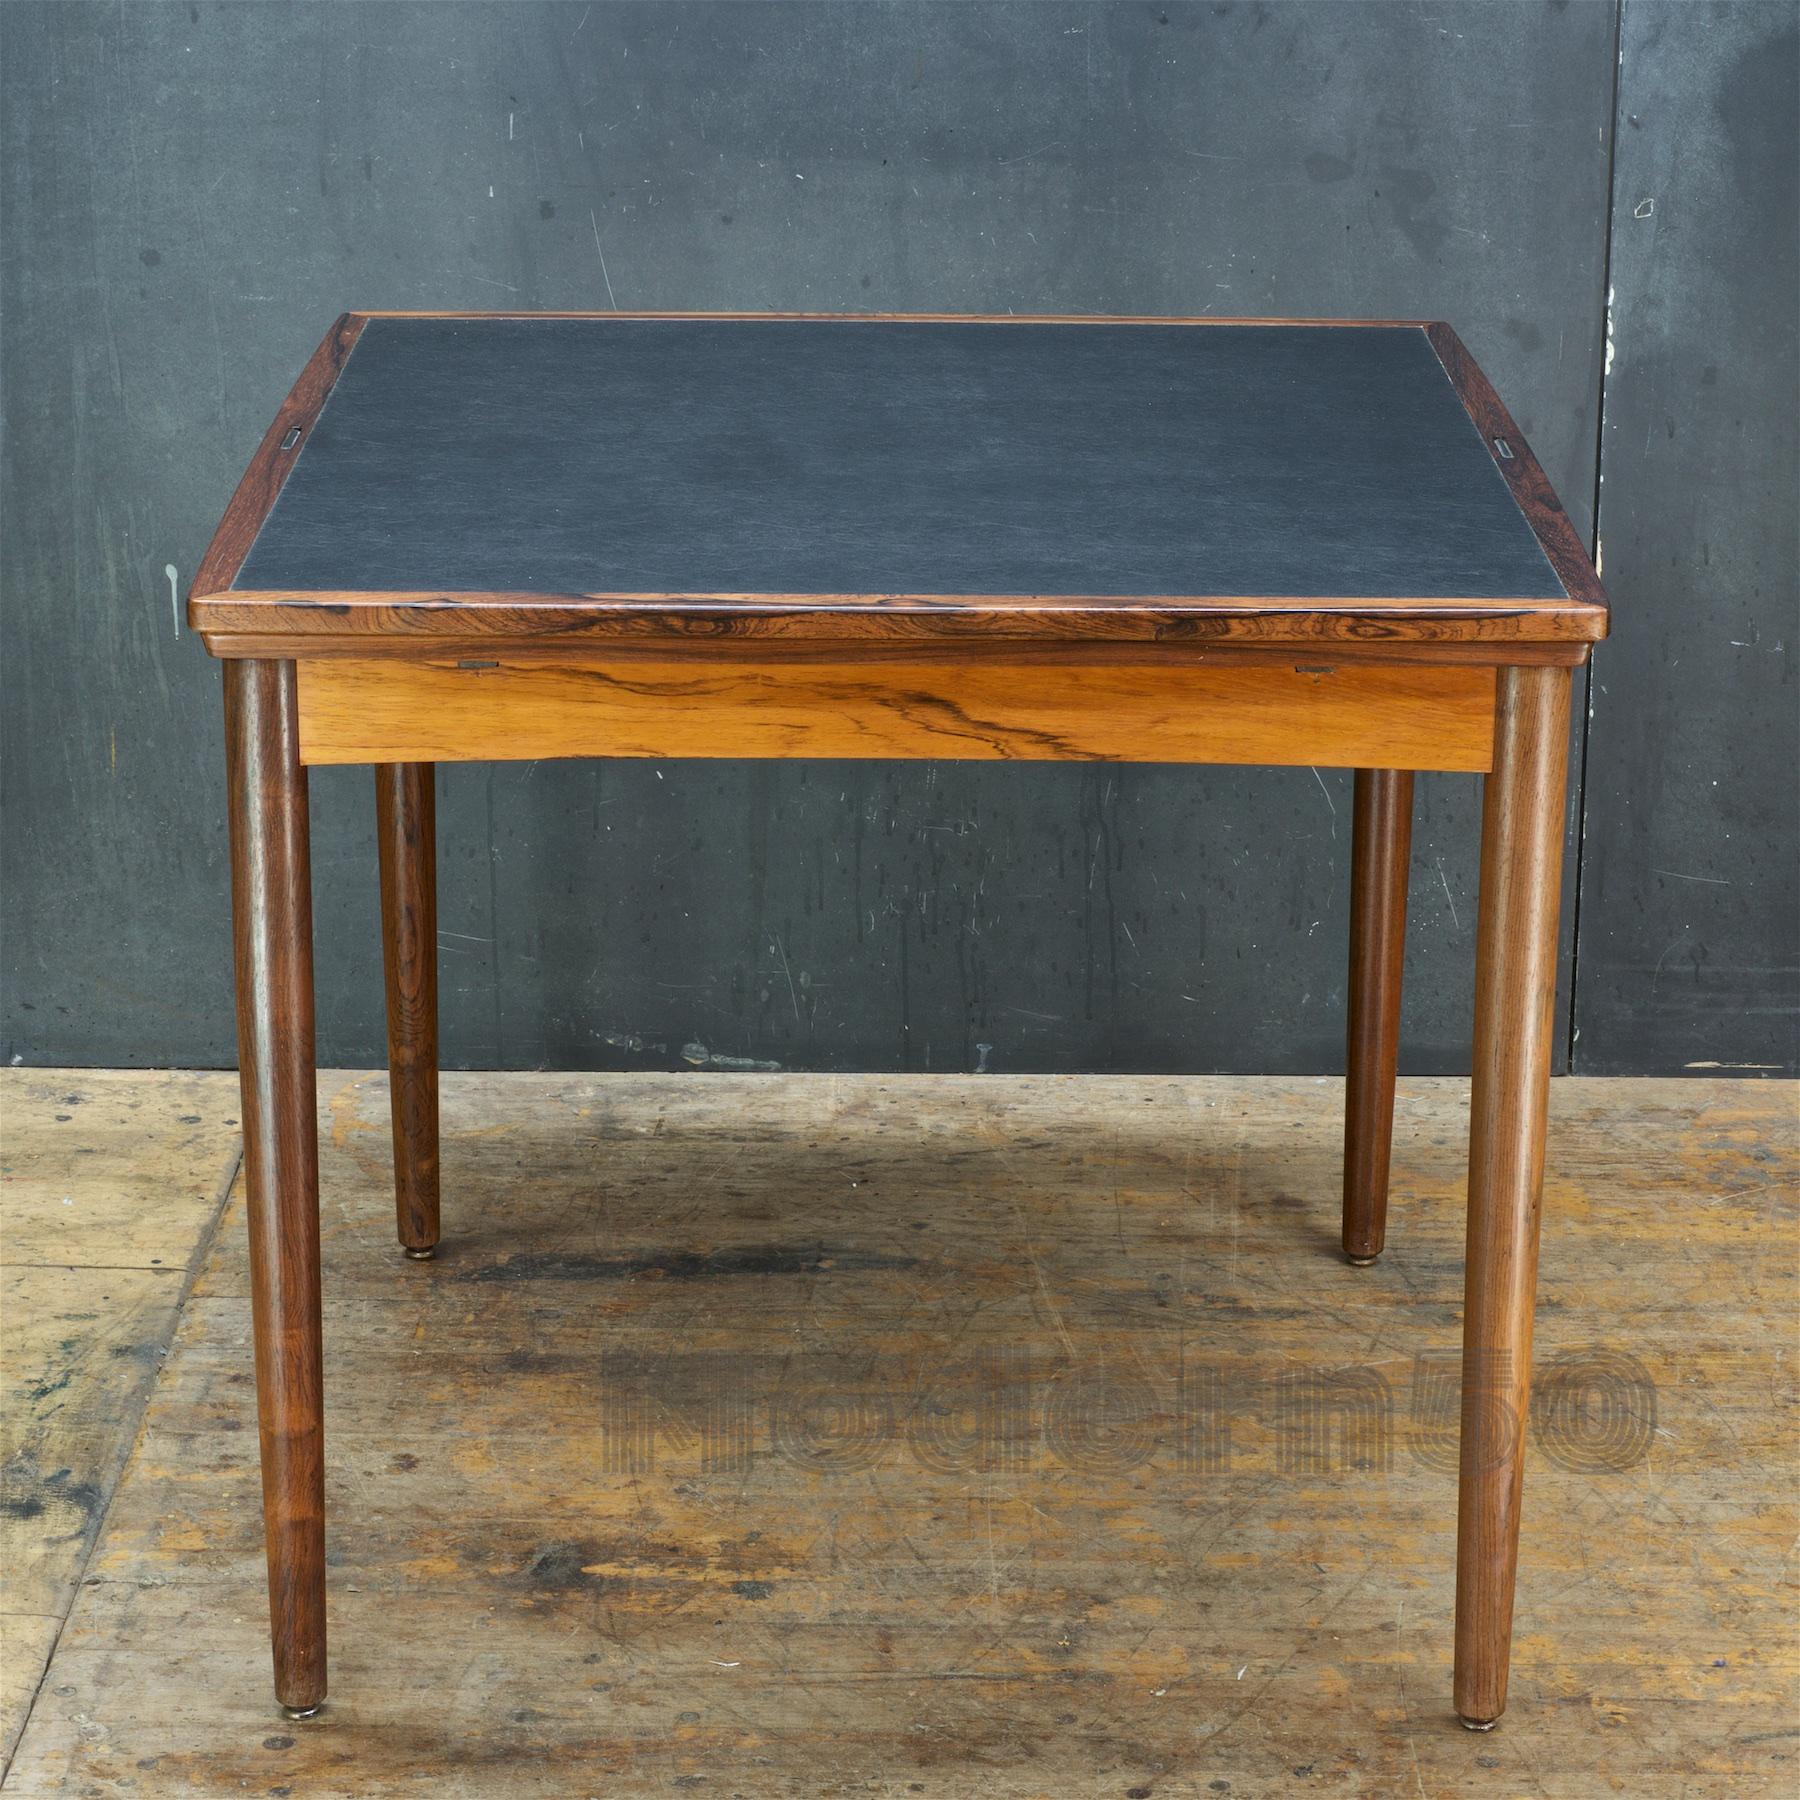 A wonderful and simple Danish design. A compact apartment sized 31.5 inch square table that has two 12.25 inch leaves that can extend independently or together to tightly sandwich the center panel to 56.38 inches.